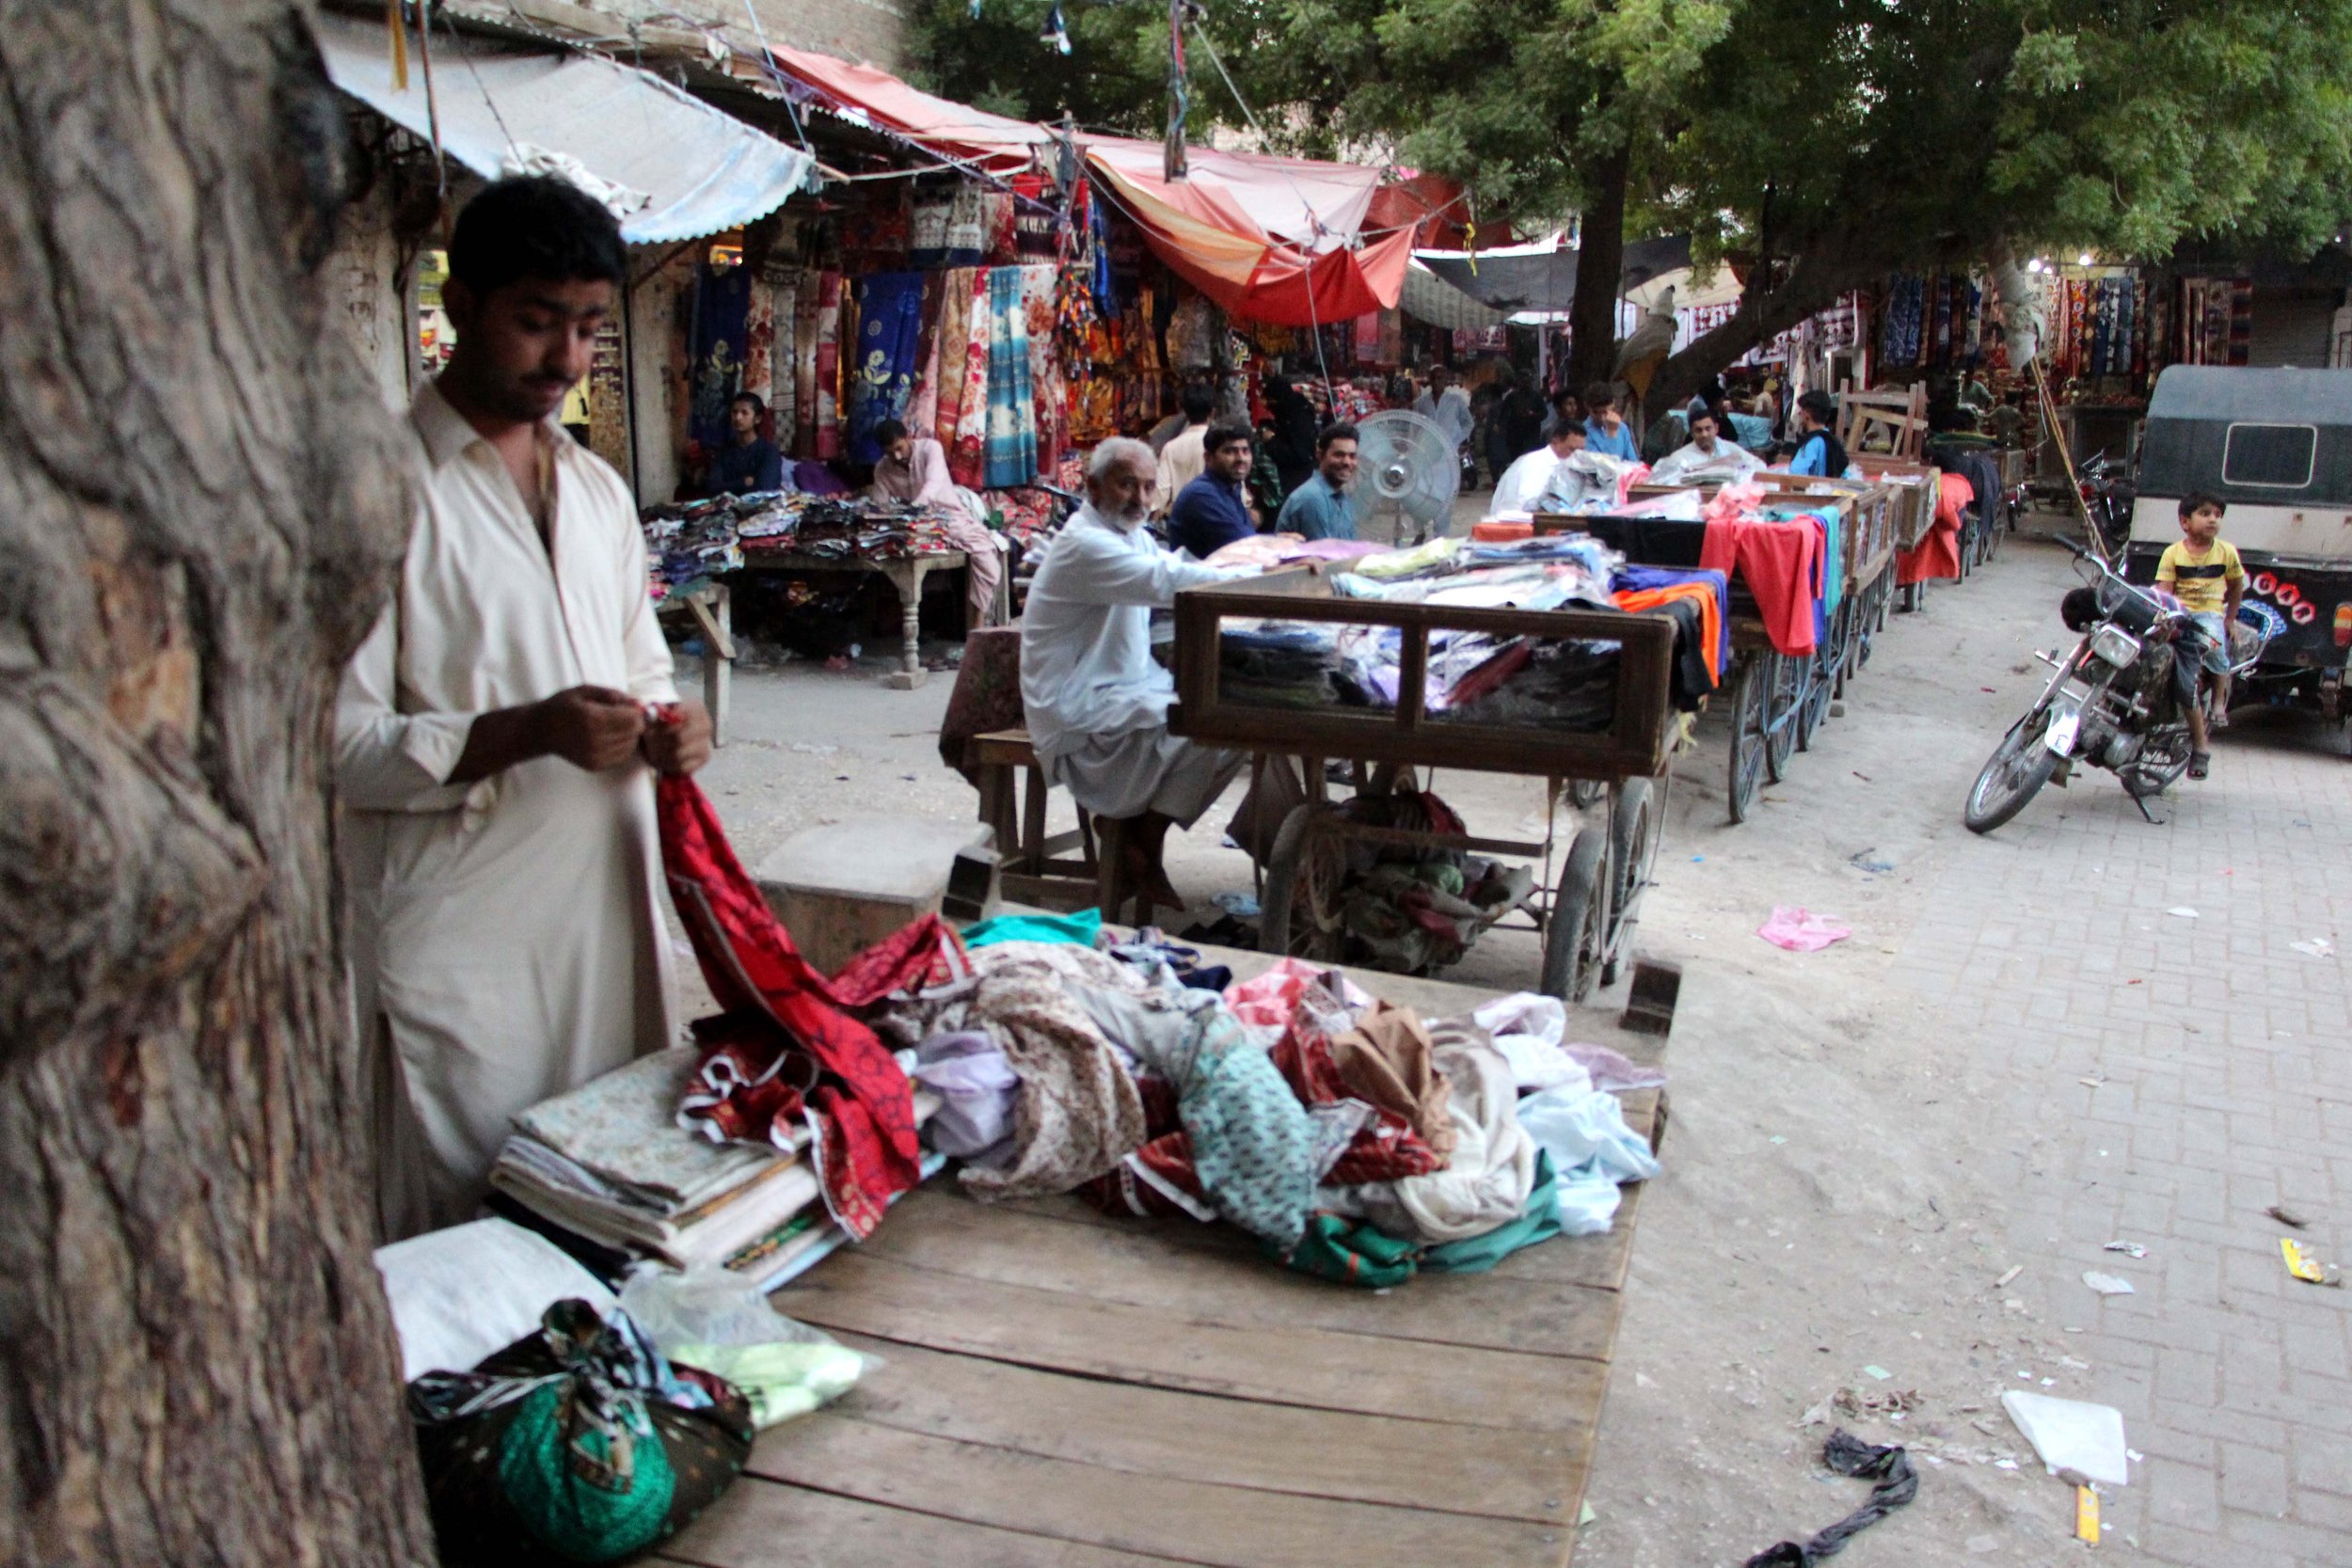  Many locals make a living with second-hand textiles. The industry helps alleviate poverty and reduce unemployment, Waseem Akhtar of the Federation of Pakistan Chambers of Commerce and Industry told Oštro. Photo: Adil Jawad. 